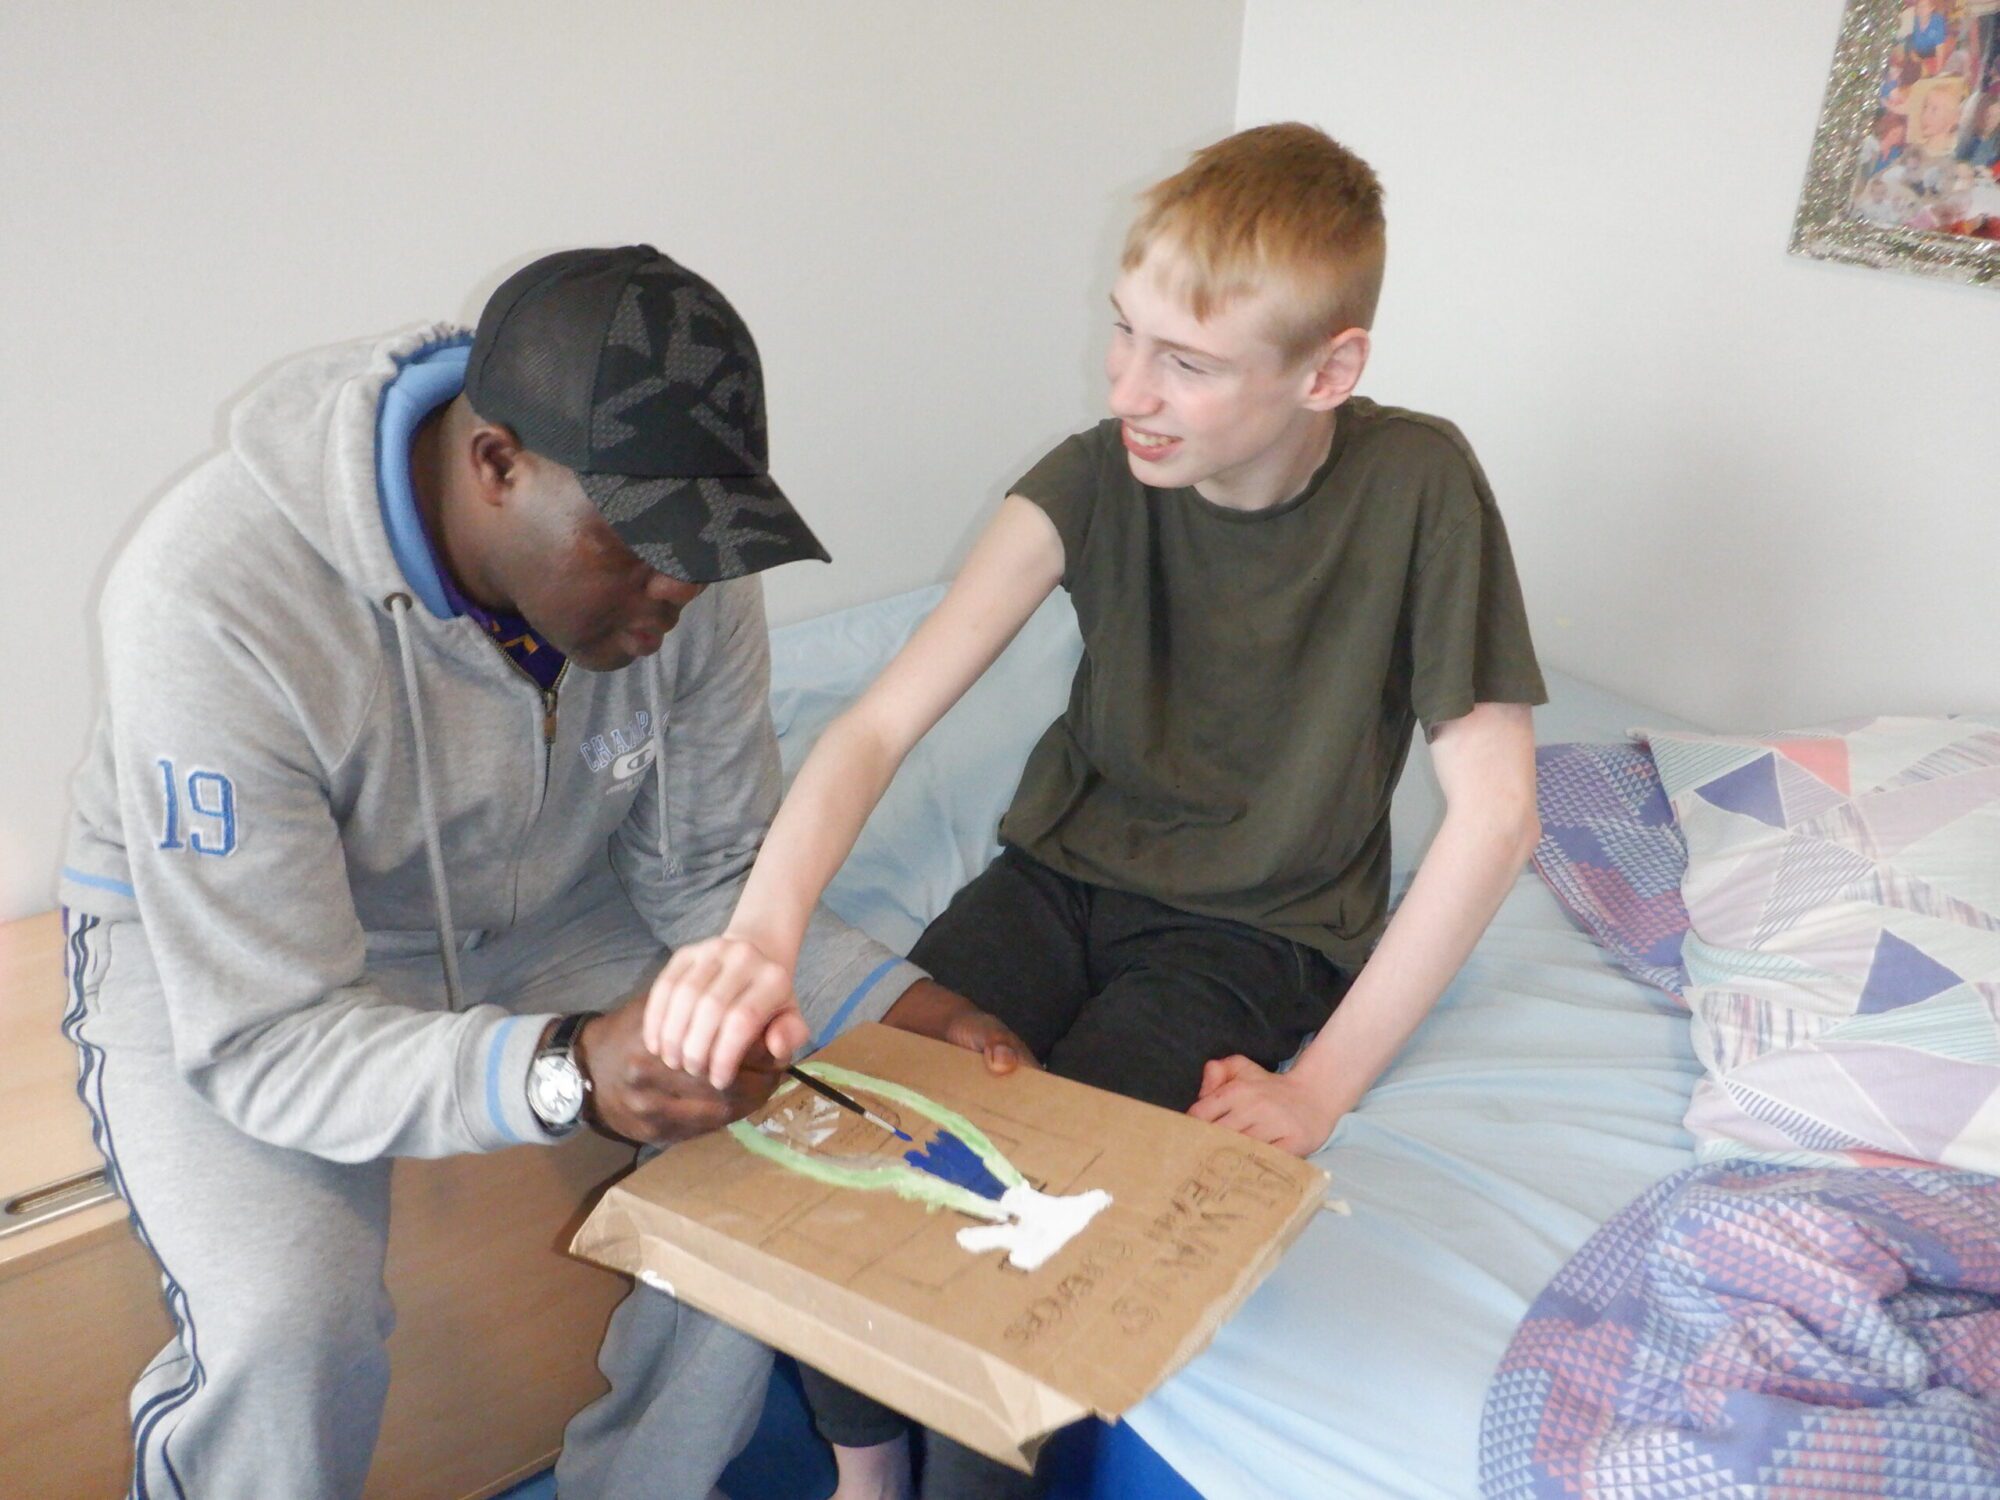 Man helping a boy paint on carboard